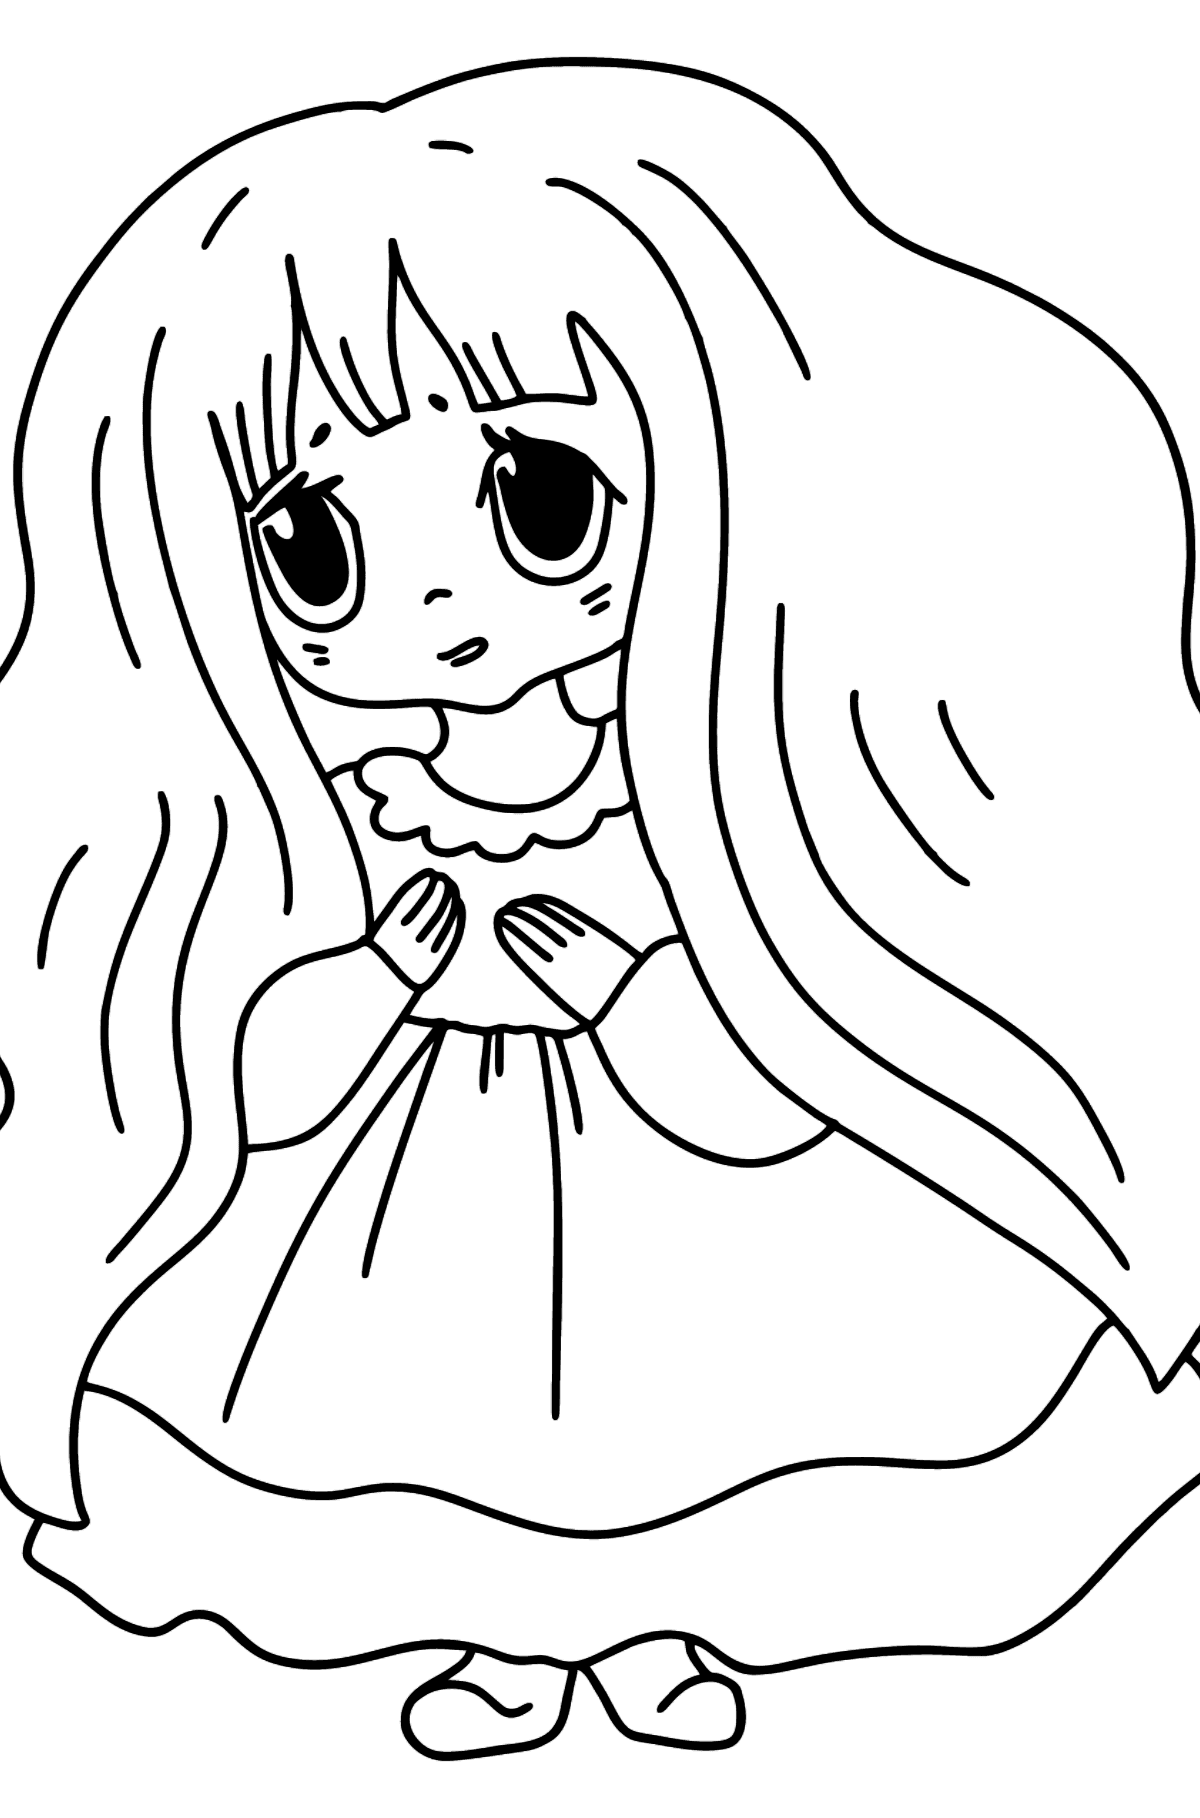 Anime Sad Girl Coloring Pages - Coloring Pages for Kids